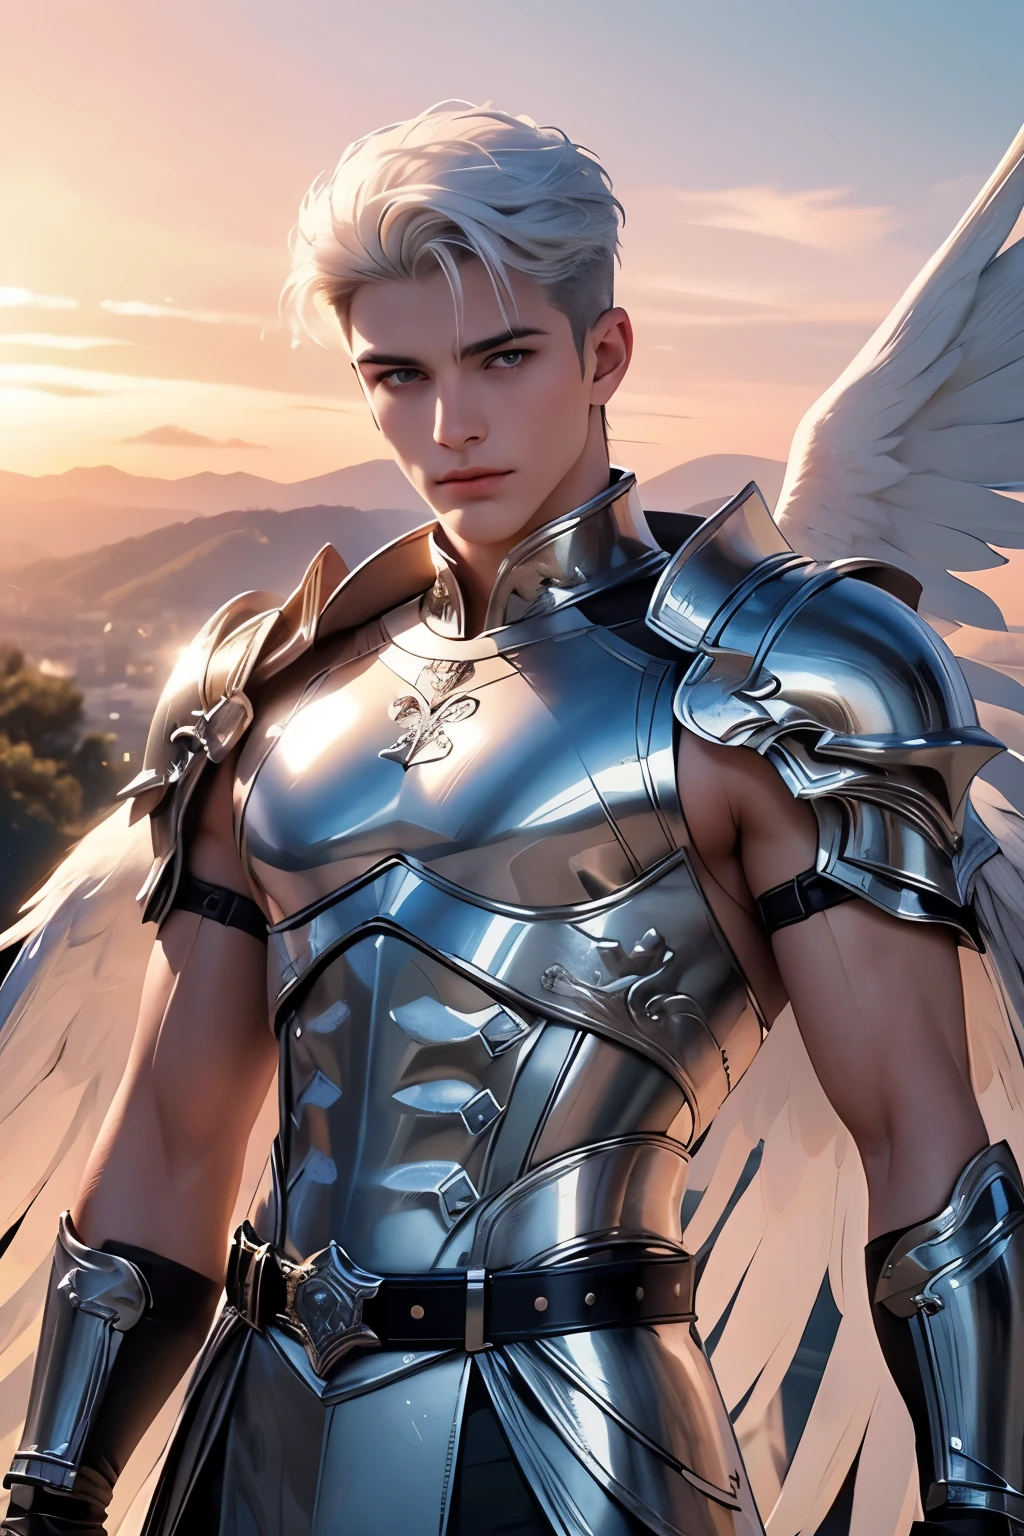 ((Best quality)), ((masterpiece)), (detailed), ((perfect face)), ((halfbody)) perfect proporcions,He is a handsome angel, 25 years old, white hair, he has white wings, He wears silver armor, angel wings, he has honey-colored eyes, There is a pink sky behind him, muscular male, he is a warriorangel, There is a sunset sky, he spreads his white angel wings there is a lake in the background, he has a metal belt, ((perfect face))